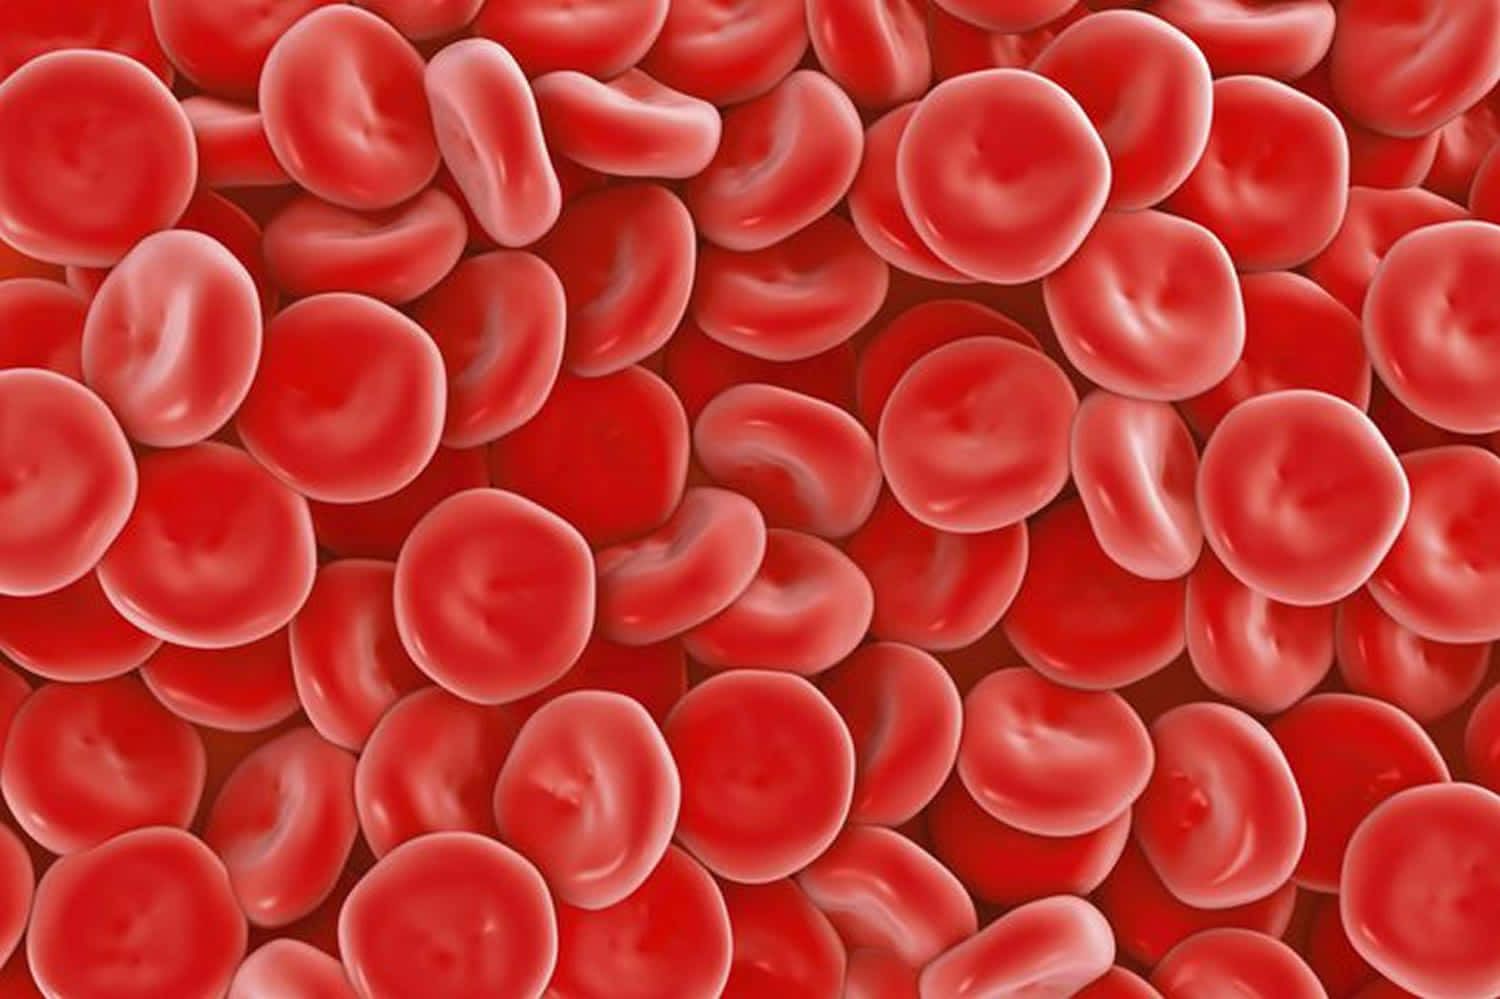 Red Blood Cells Flowing Through the Bloodstream Wallpaper